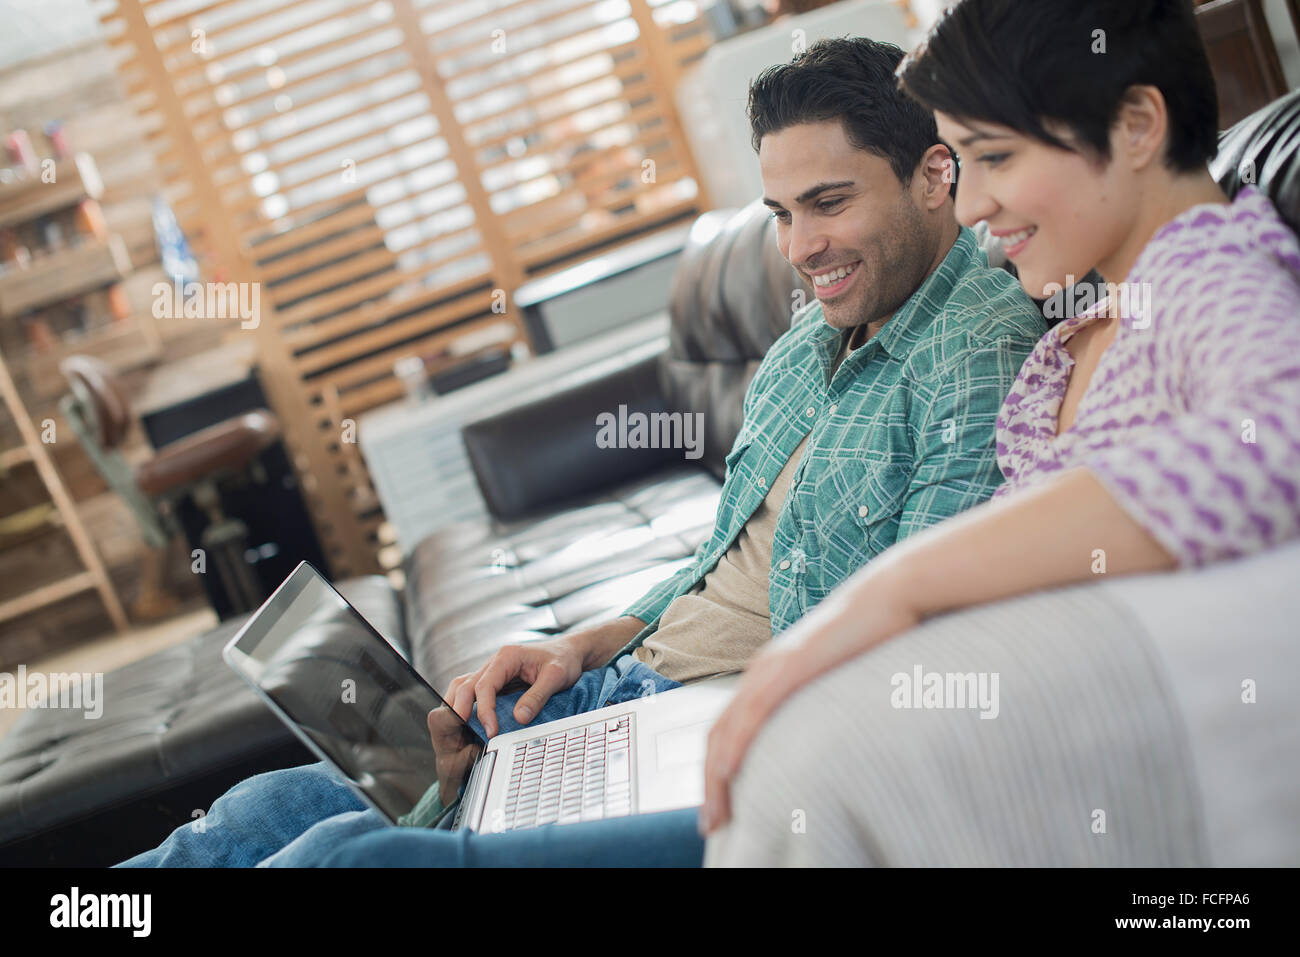 A man and woman sitting on a sofa, looking at the screen of a laptop. Stock Photo